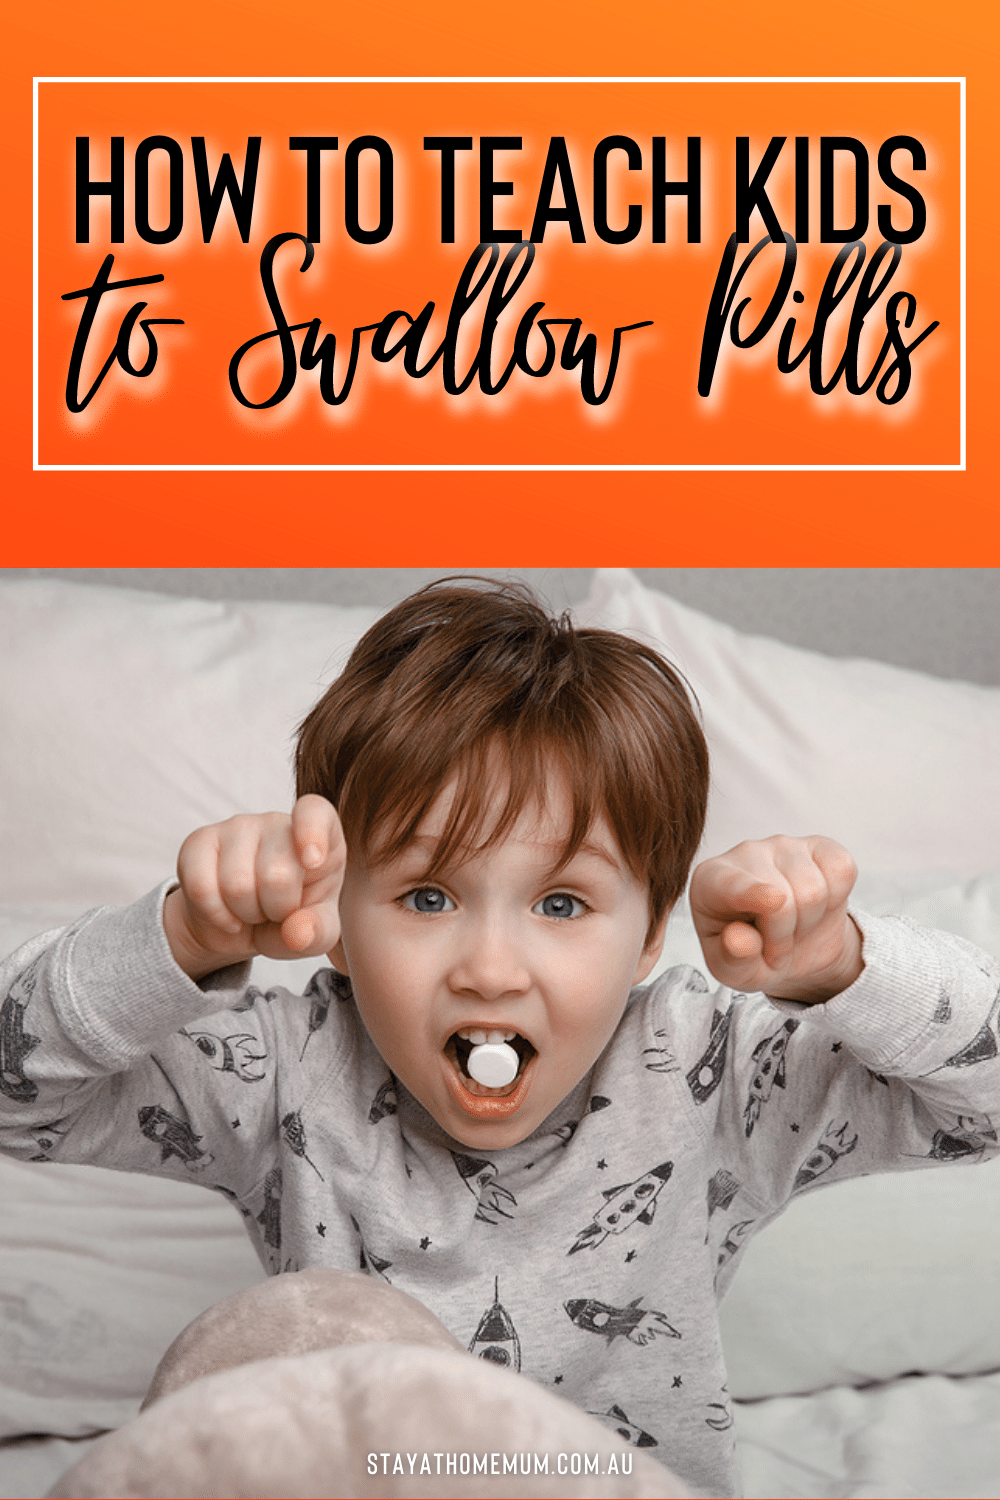 How to Teach Kids to Swallow Pills | Stay At Home Mum